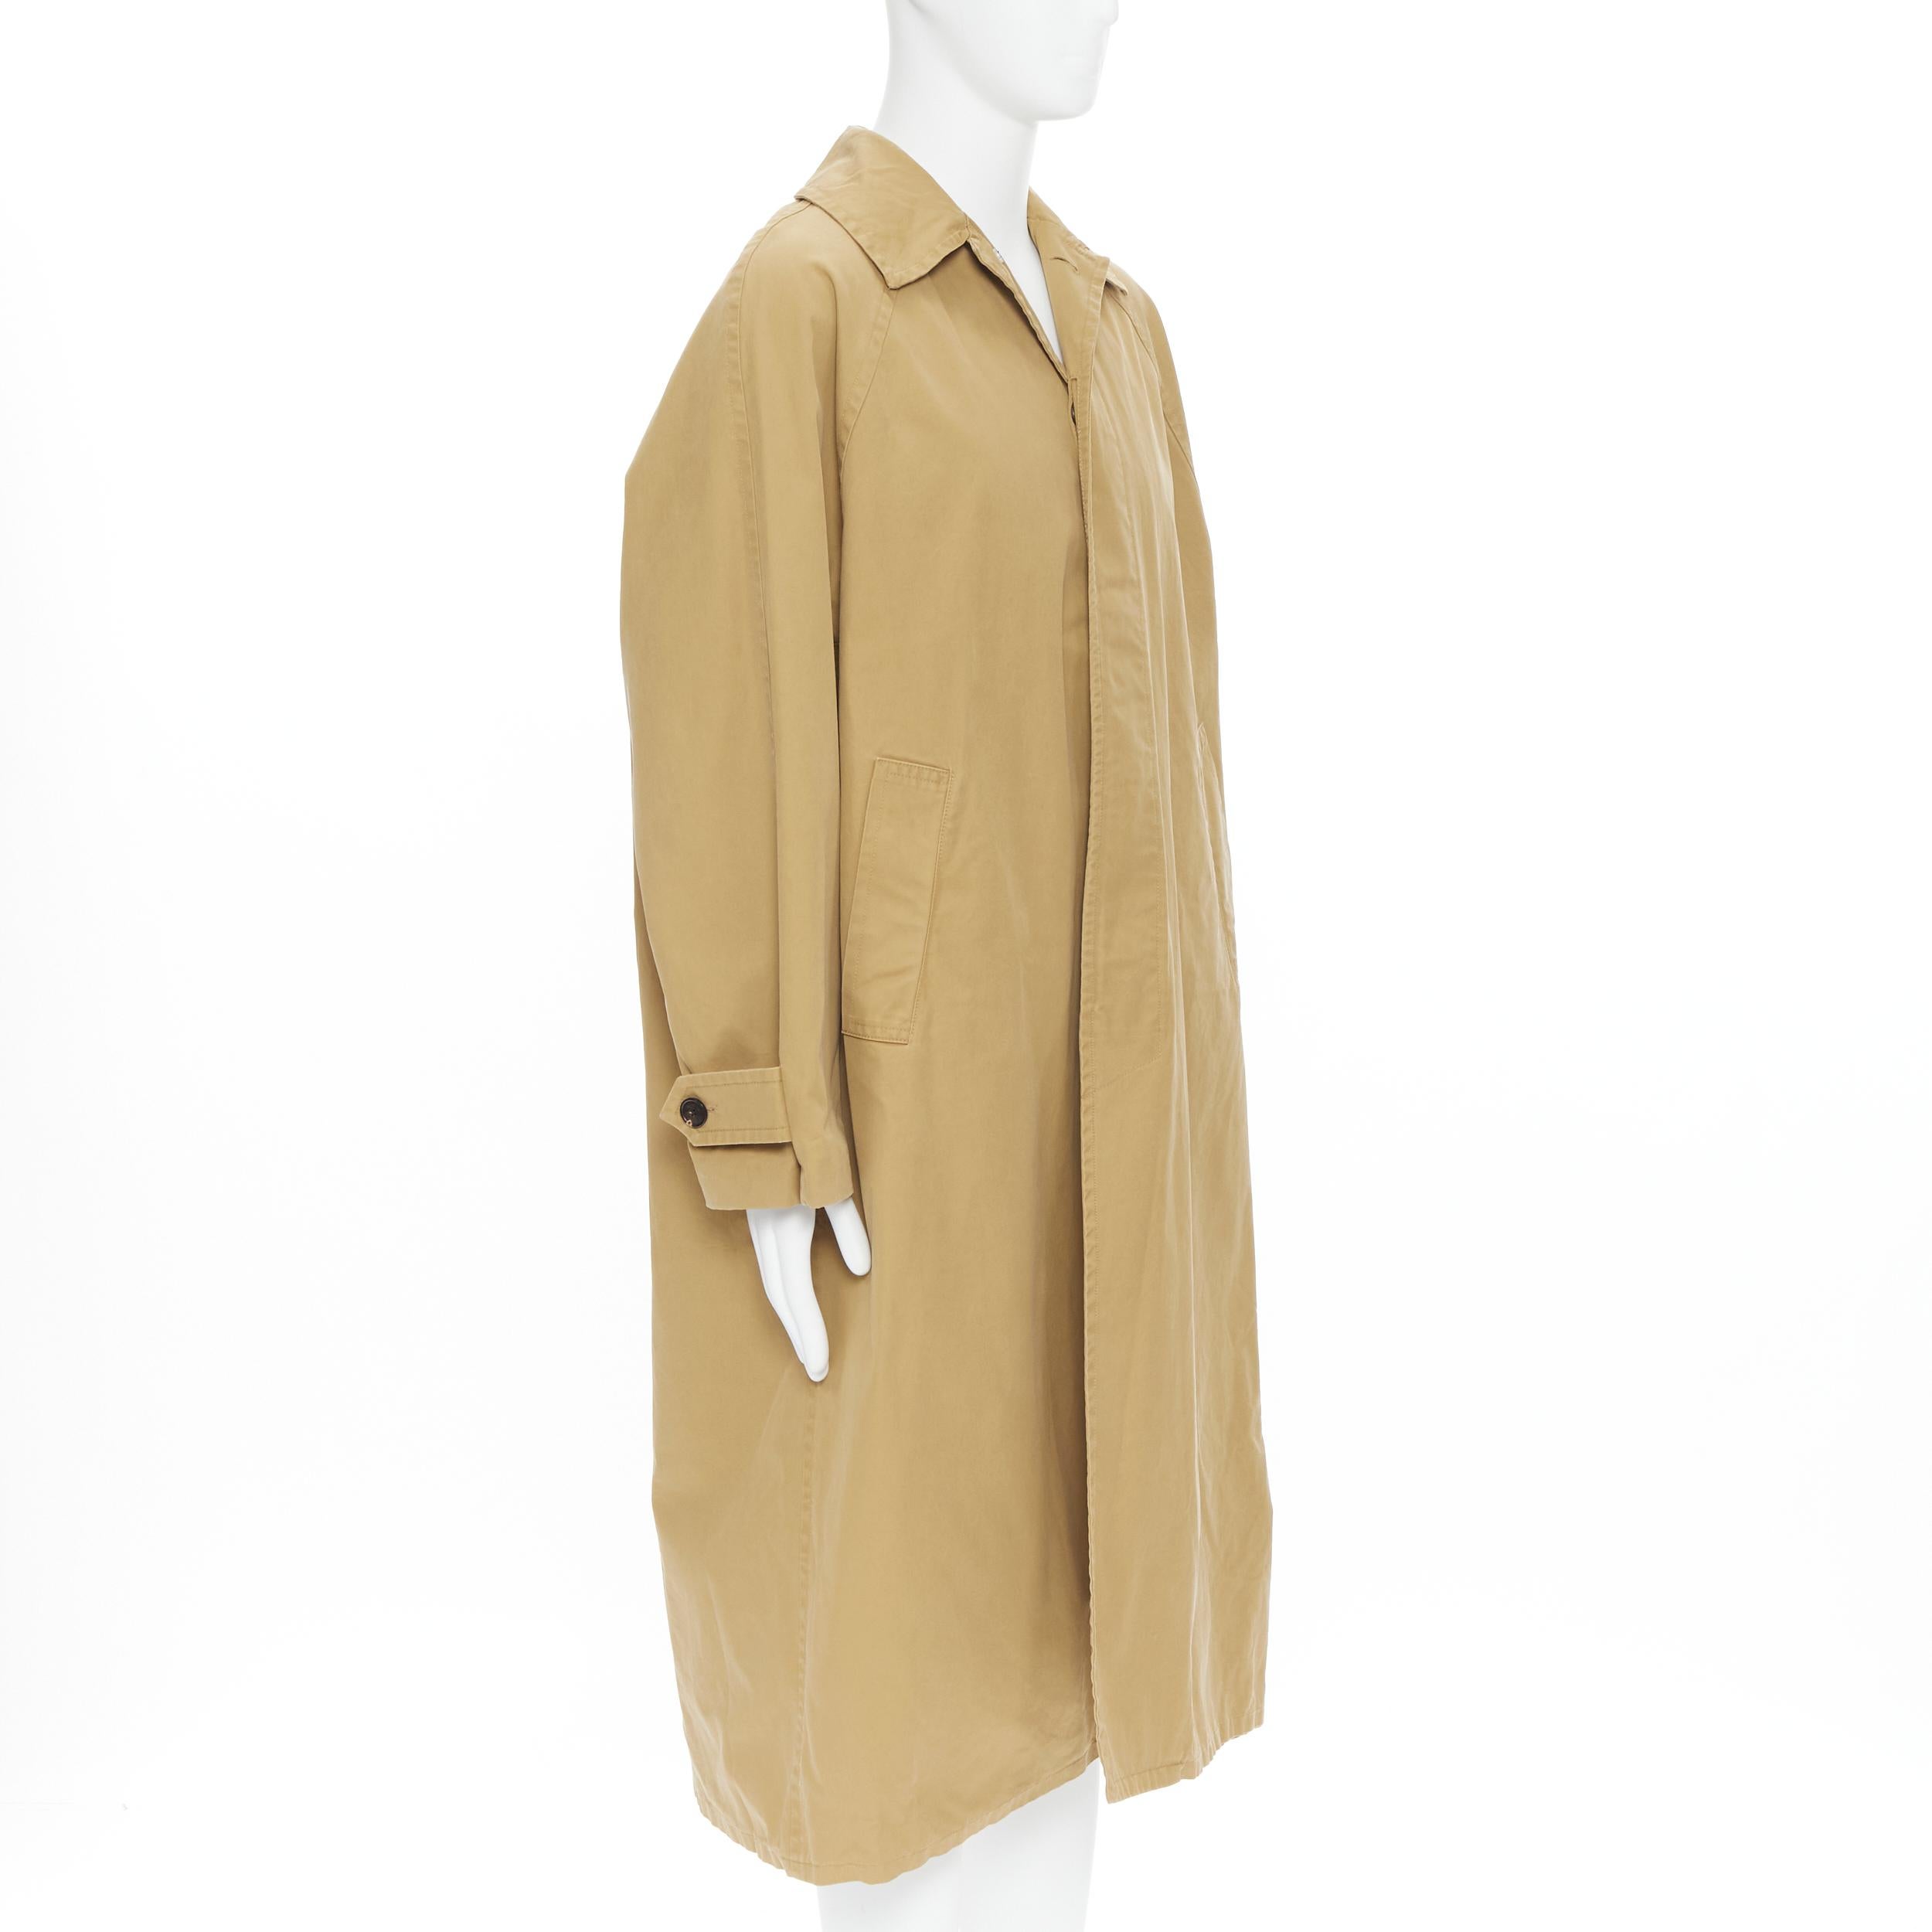 BALENCIAGA 2018 beige heavy cotton rounded shoulder oversized XL car coat 
Reference: EDTG/A00060 
Brand: Balenciaga 
Designer: Demna Gvasalia 
Material: Cotton 
Color: Beige 
Pattern: Solid 
Closure: Button 
Extra Detail: Heavy weight cotton.